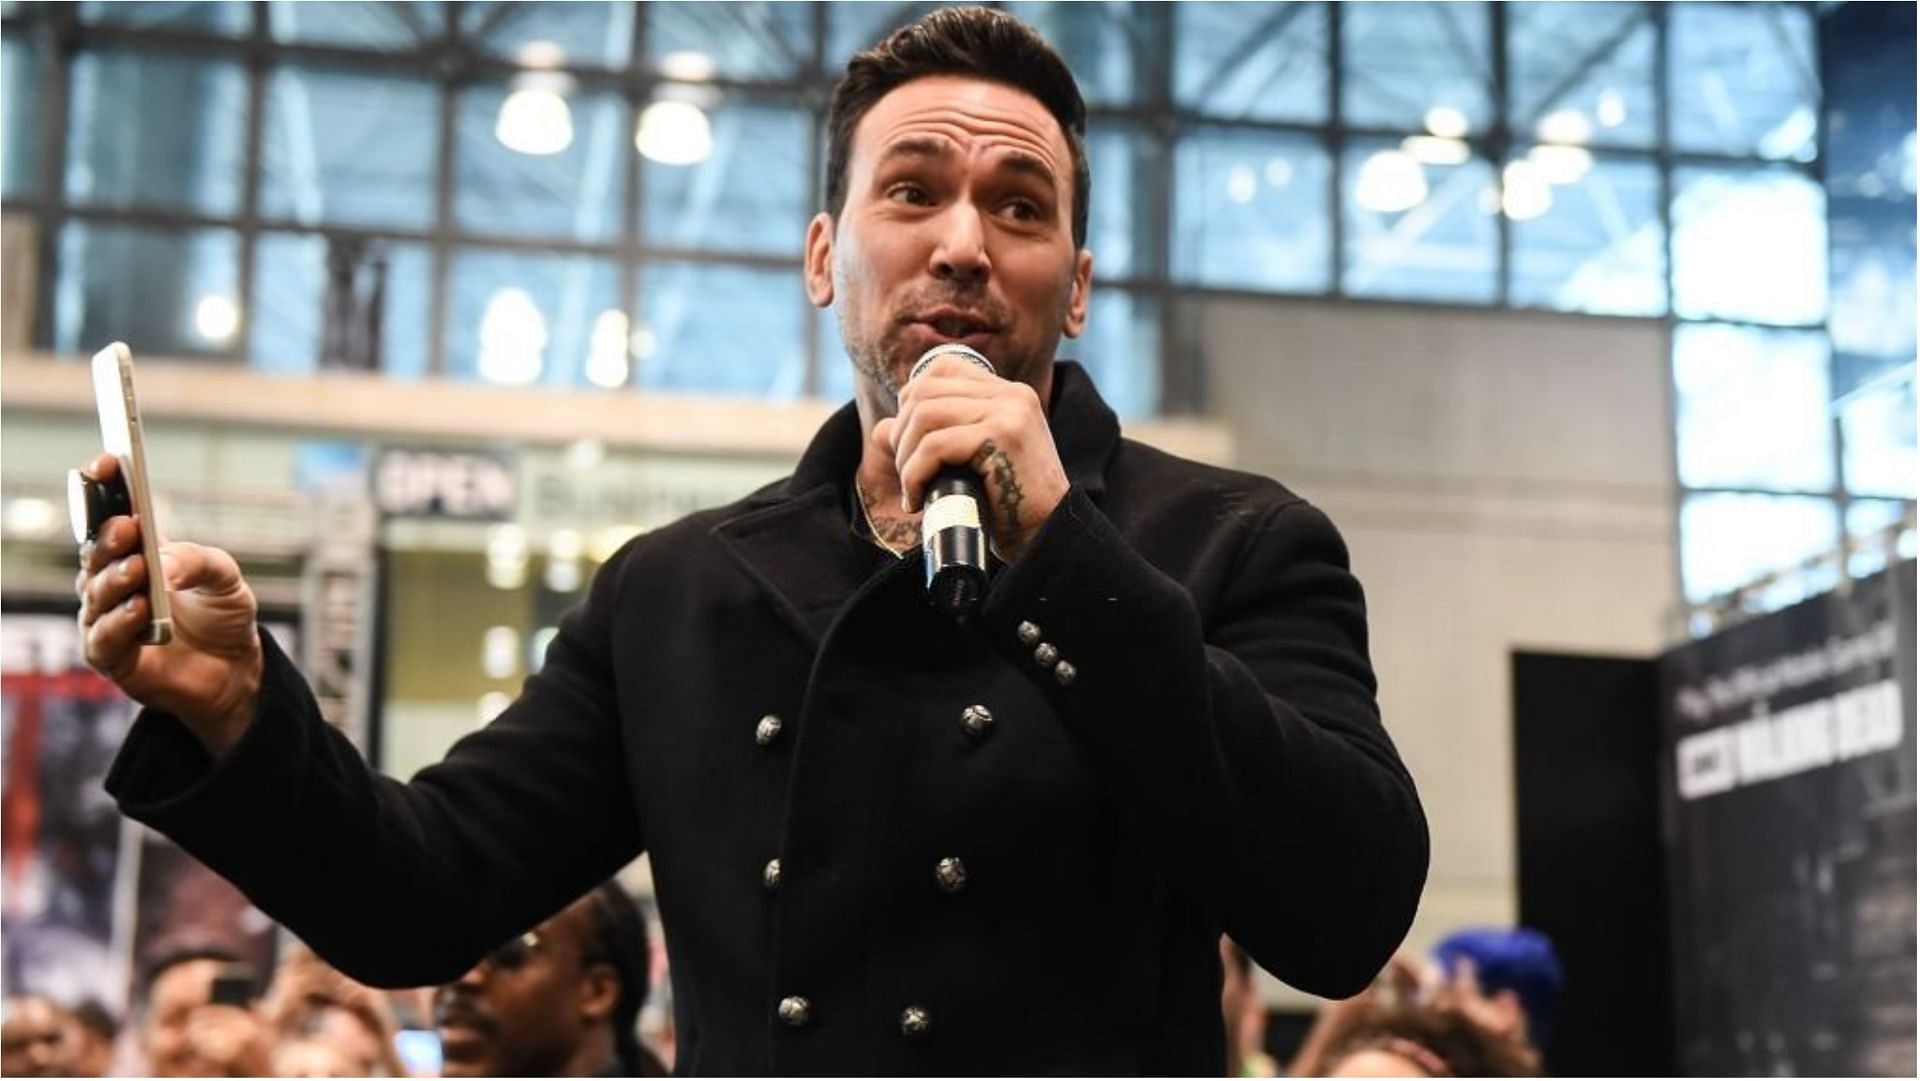 Jason David Frank recently died at the age of 49 (Image via Daniel Zuchnik/Getty Images)